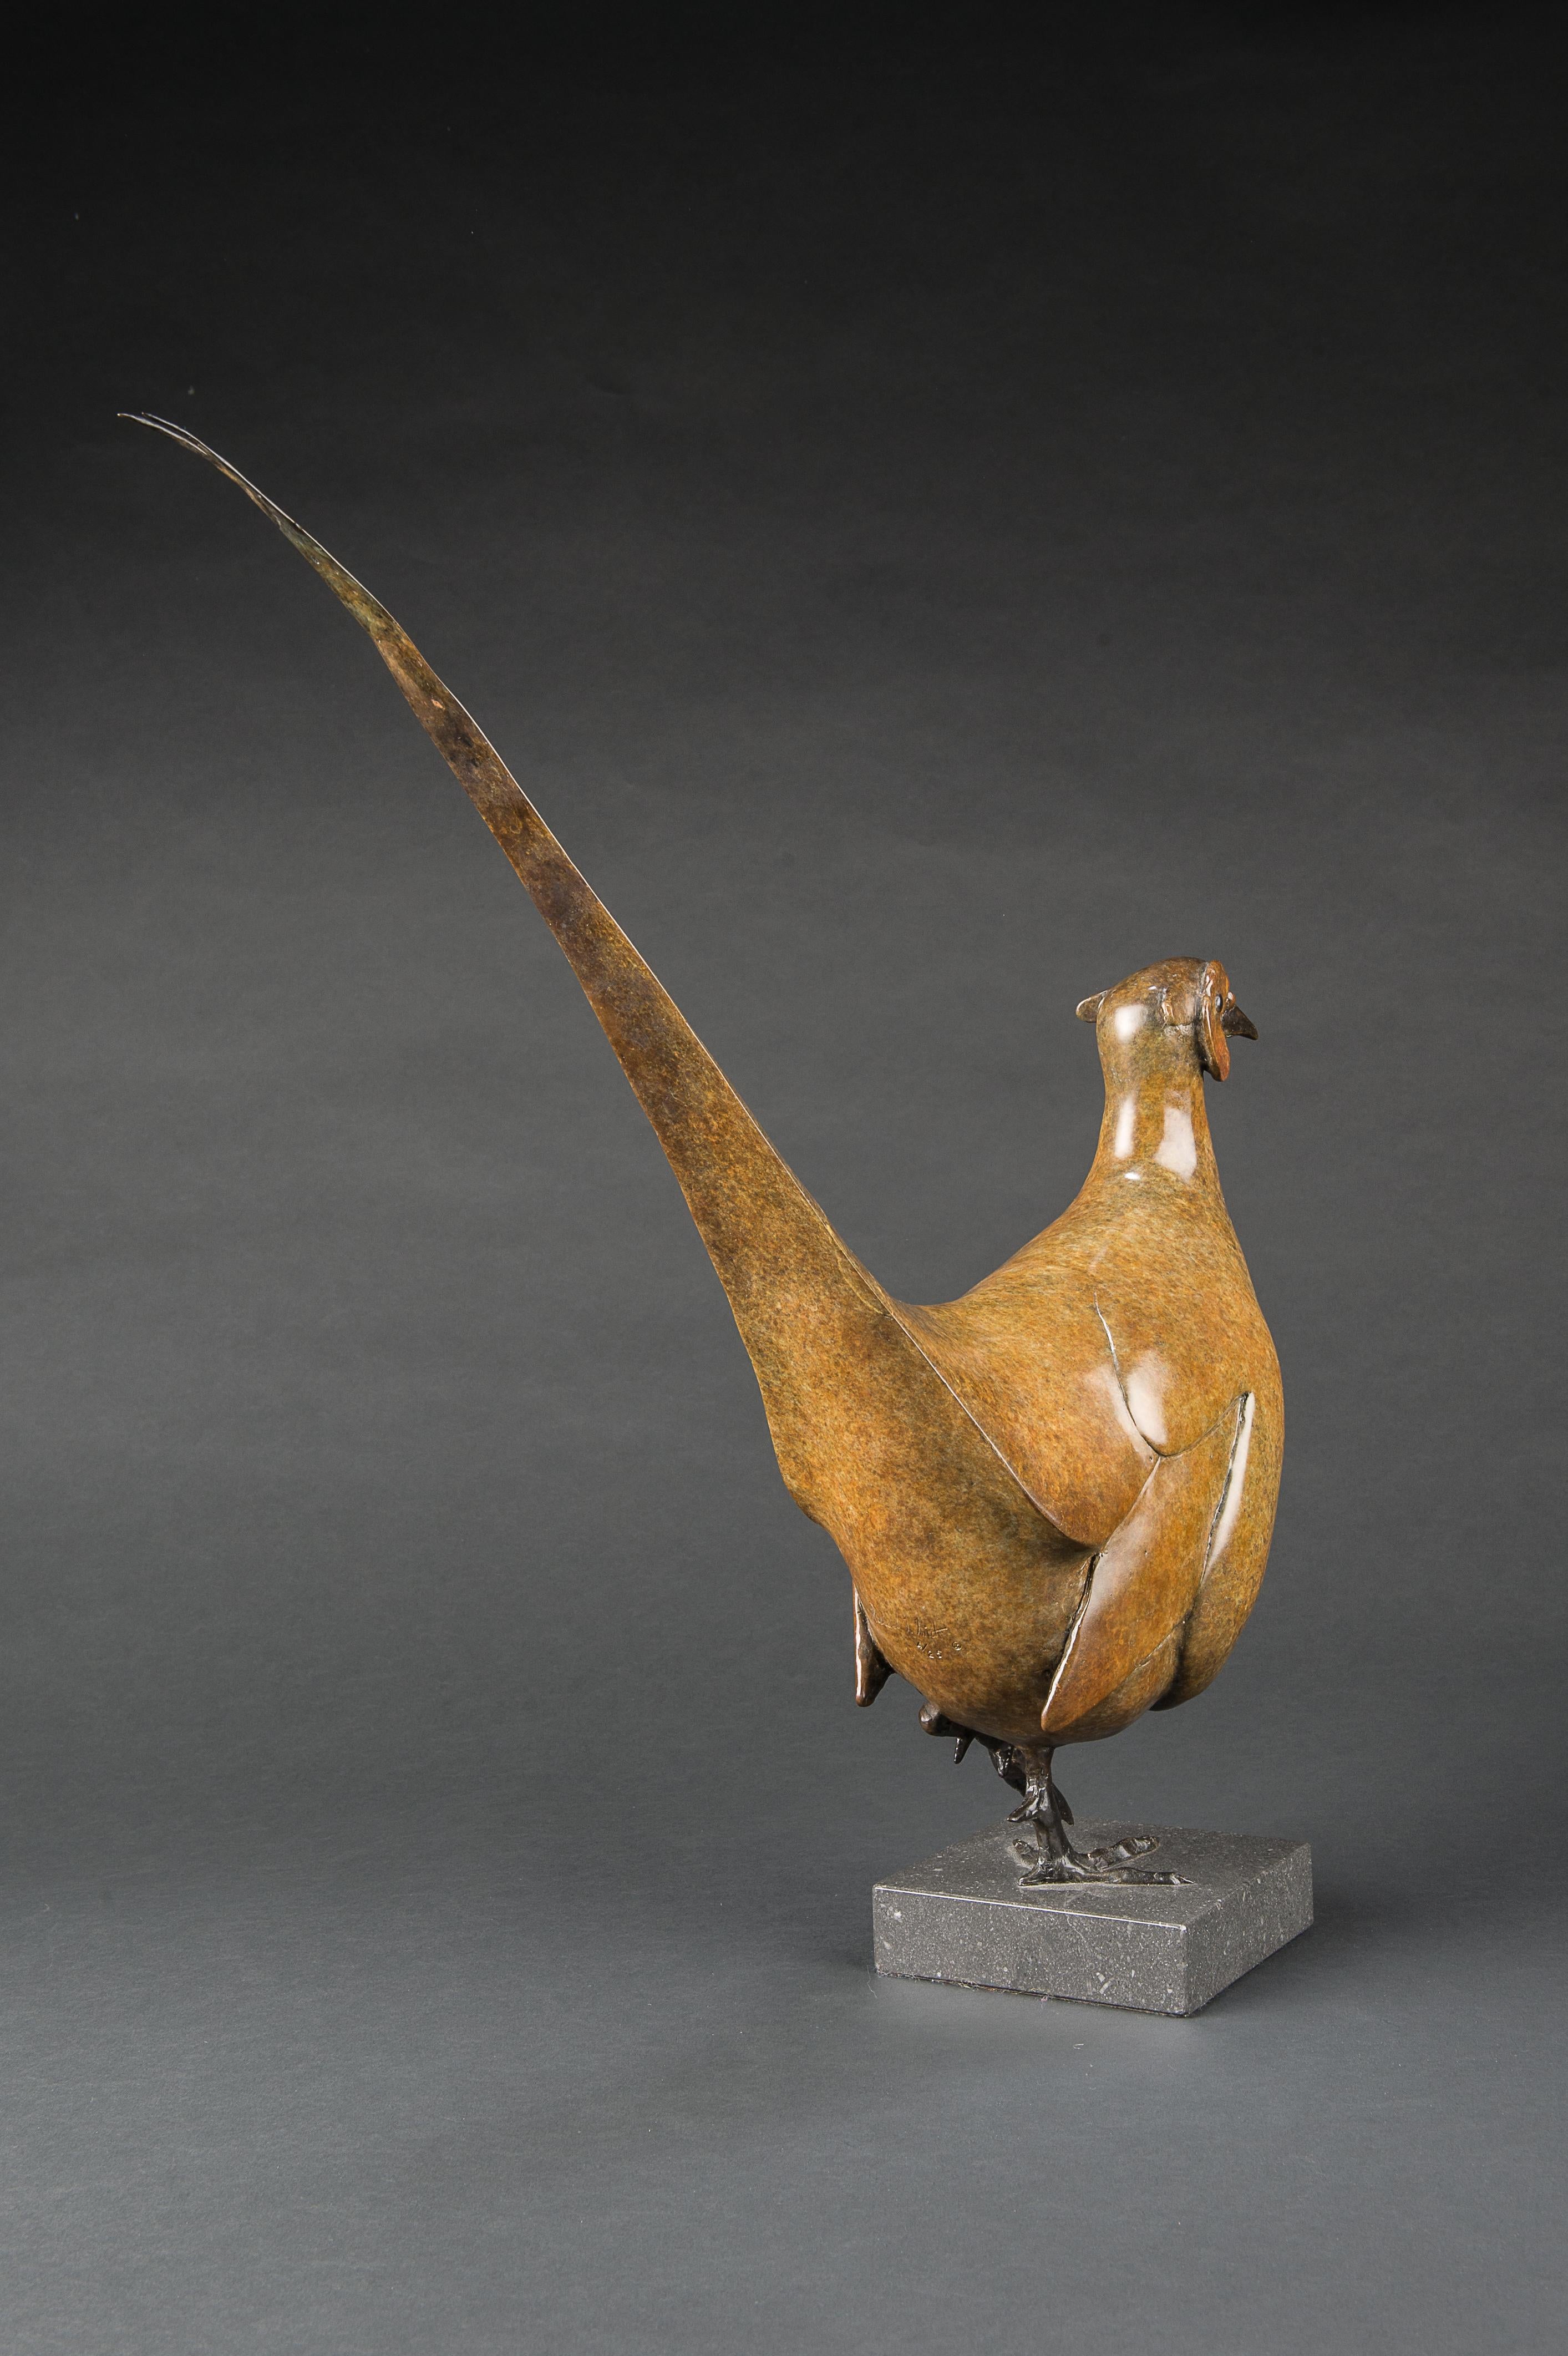 'Cock Pheasant' by Richard Smith has a real elegance in it's pose. The piece is a perfect addition to any collector of wildlife sculpture or outdoor enthusiast.

Richard Smith has gained an international reputation for his works of art, he has